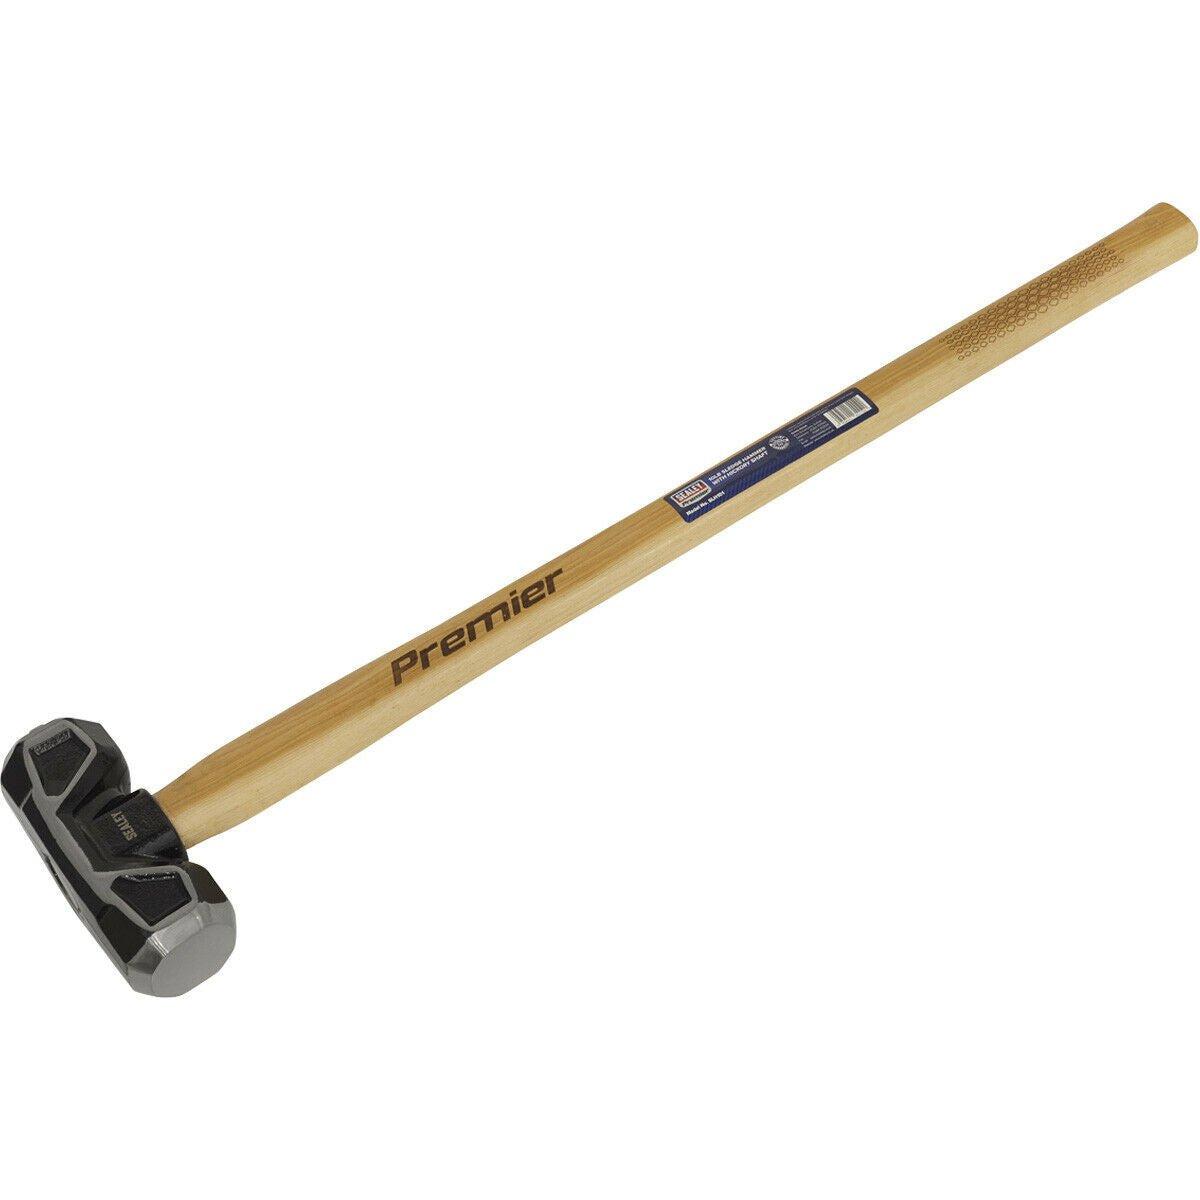 10lb Hardened Sledge Hammer - Hickory Wooden Shaft - Drop Forged Carbon Steel